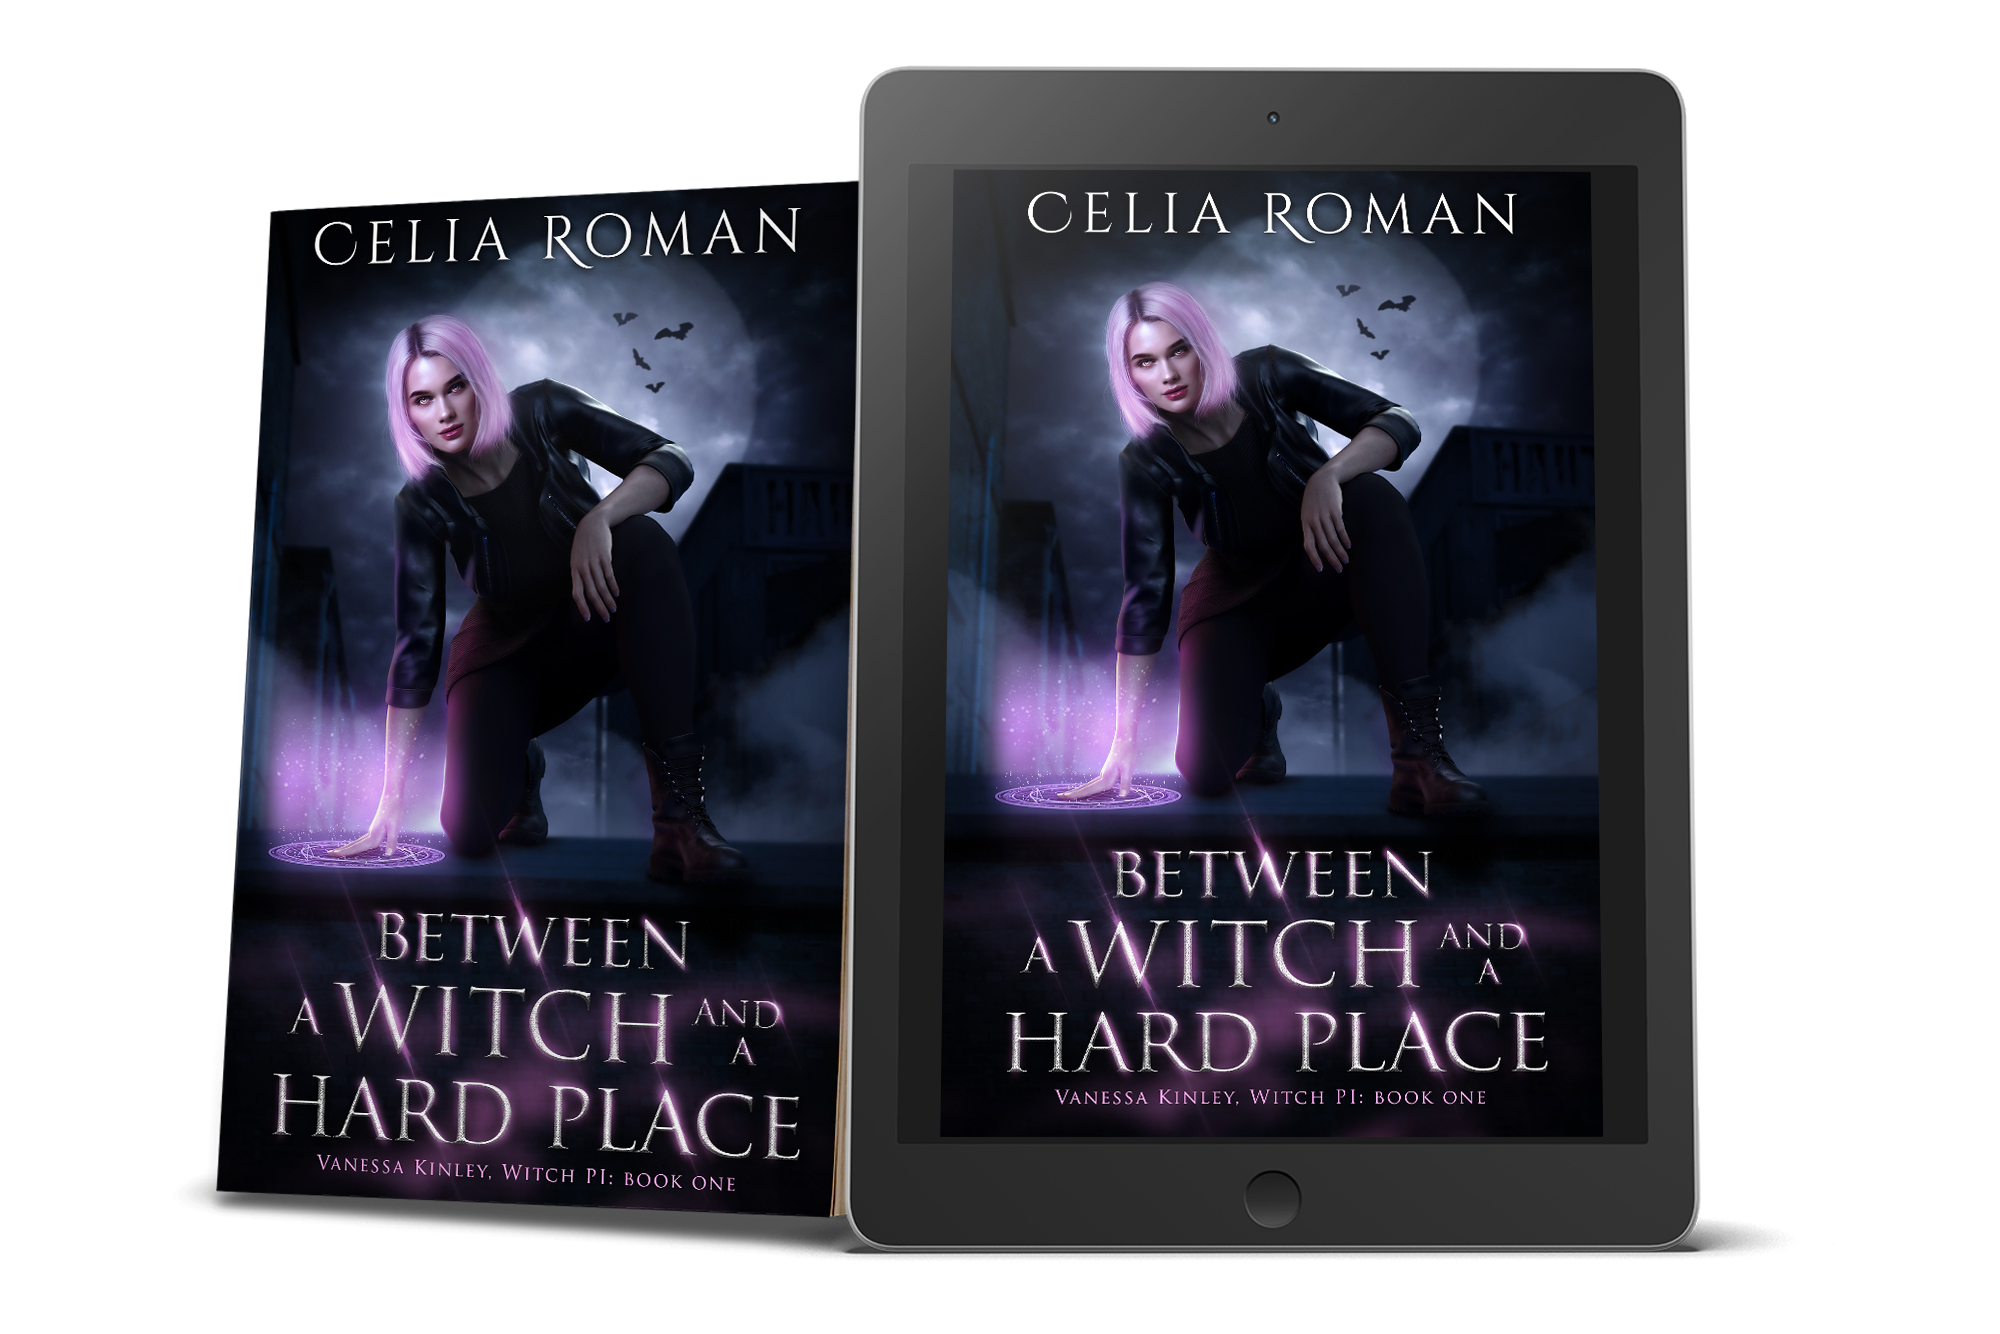 Between a Witch and a Hard Place (Vanessa Kinley, Witch PI, Book 1) by Celia Roman